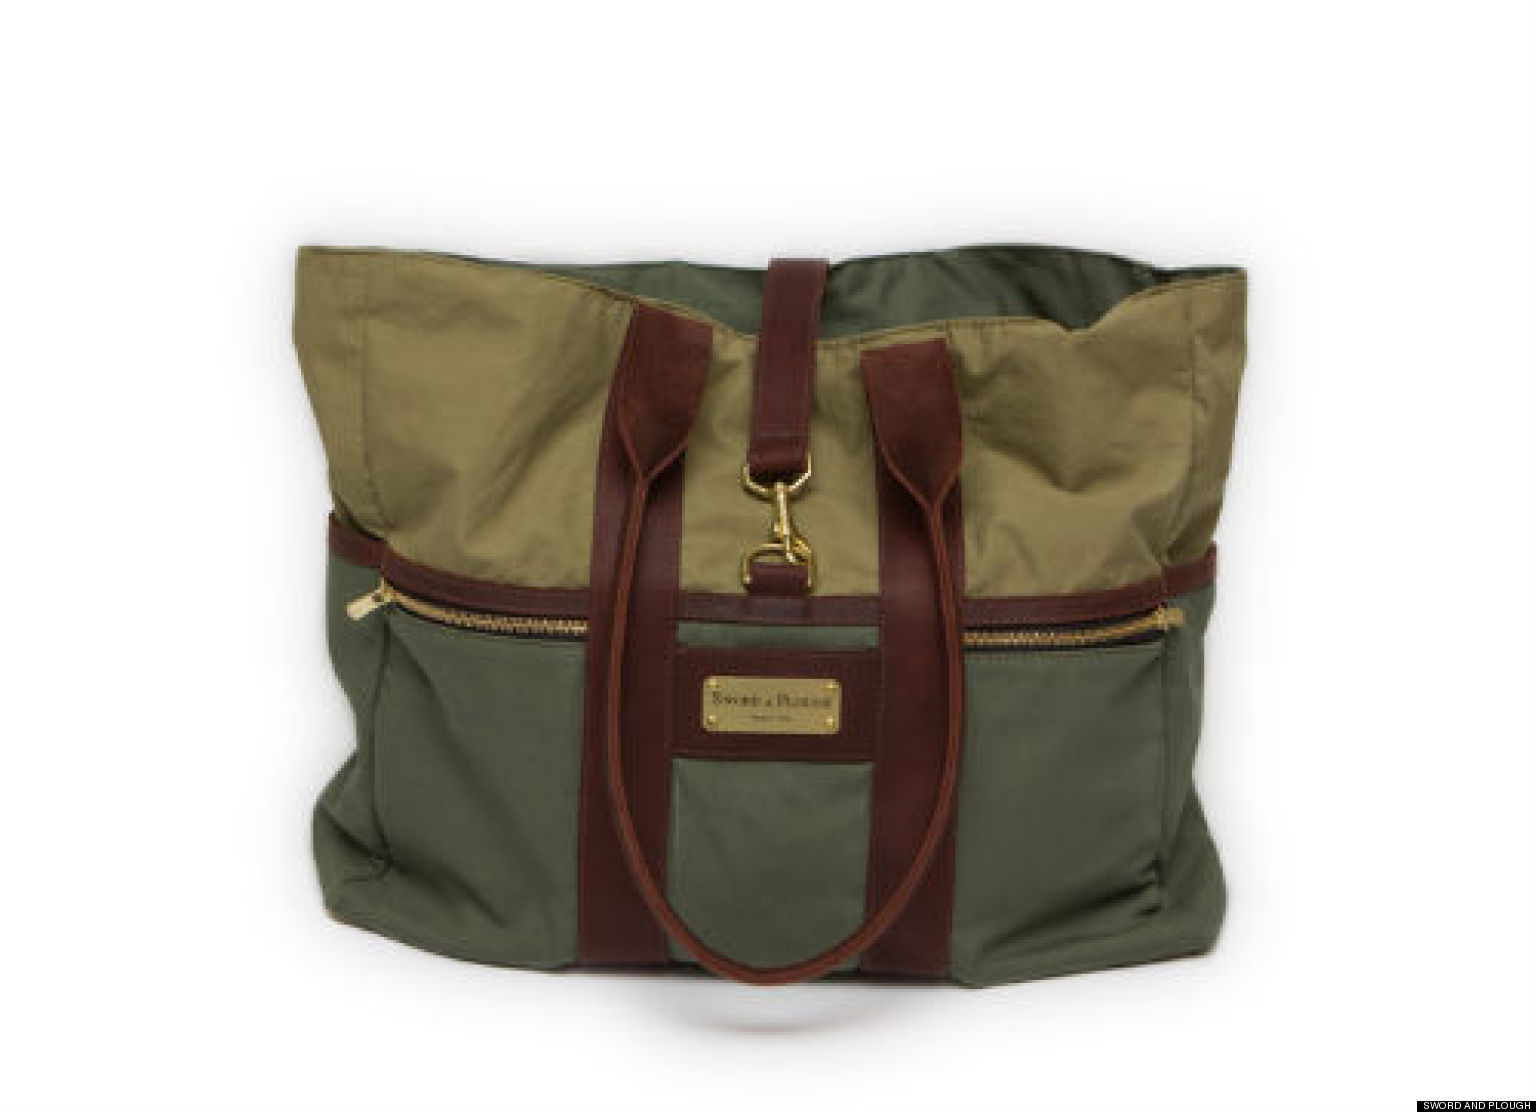 Newly Launched Brand Repurposes Military Canvas as Stylish Handbags | HuffPost